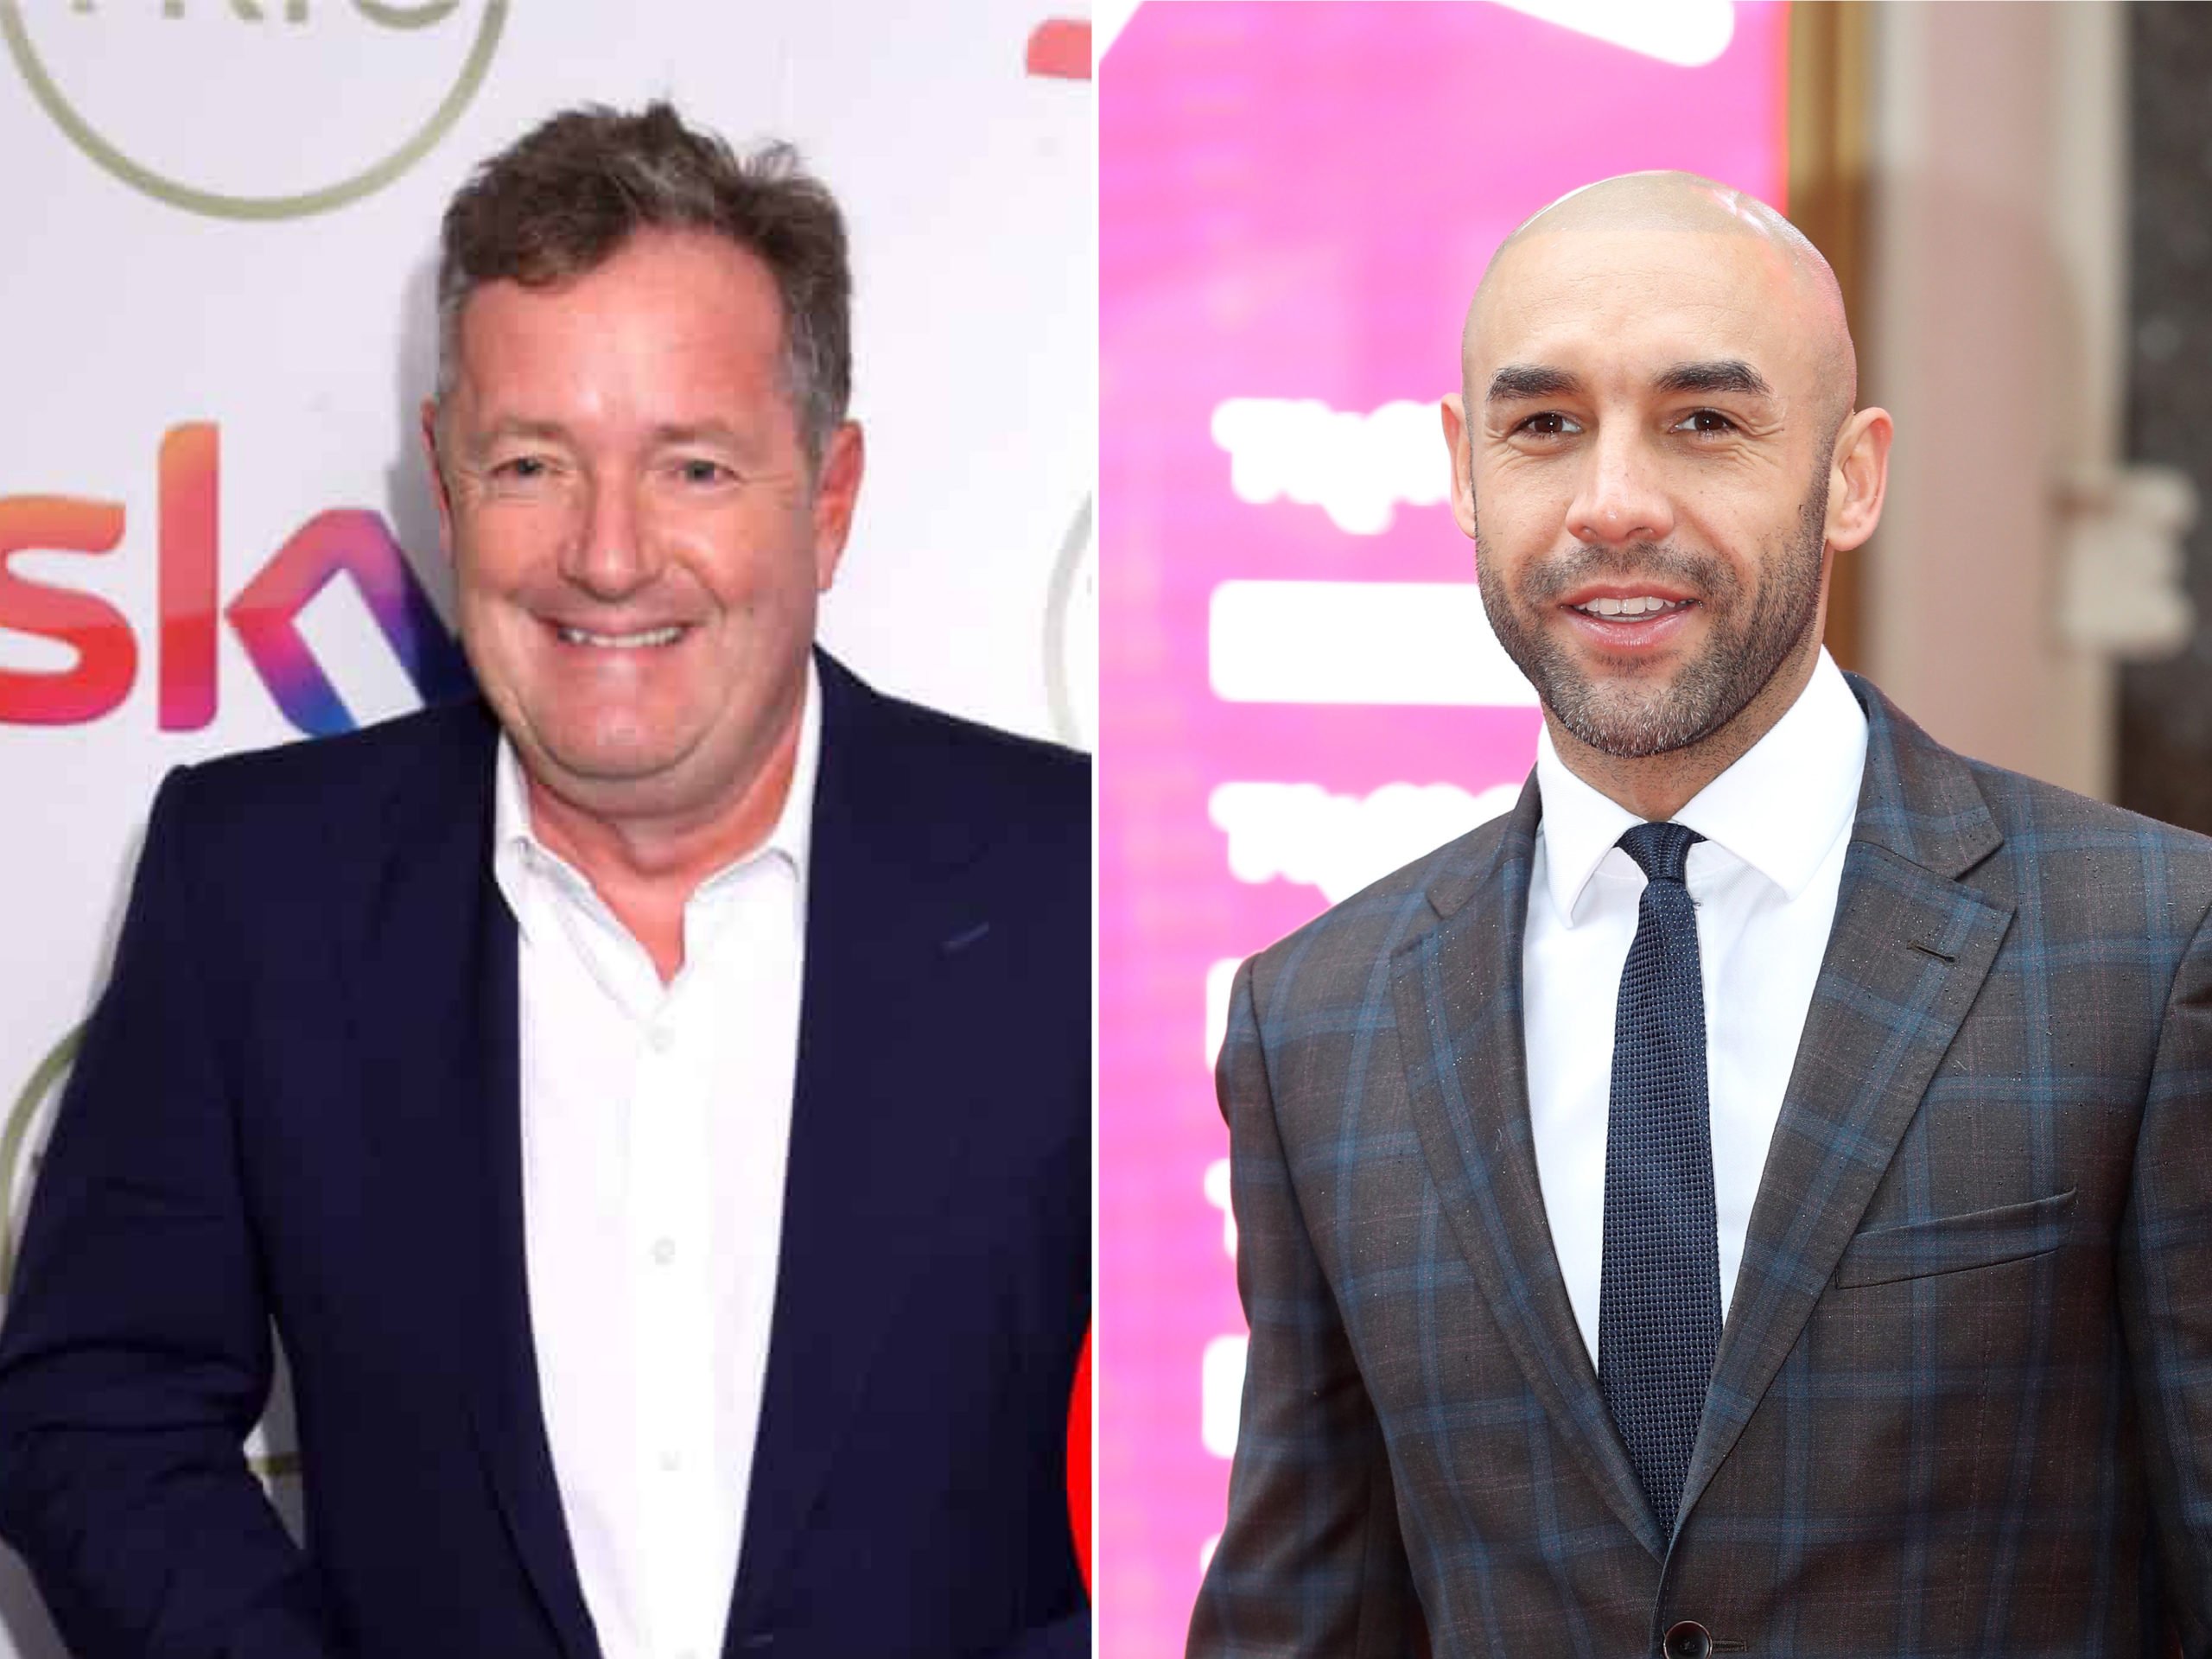 Piers Morgan Walks Off Of The 'Good Morning Britain' Set As Alex Beresford Confronts Him About His Criticism Towards Meghan Markle 